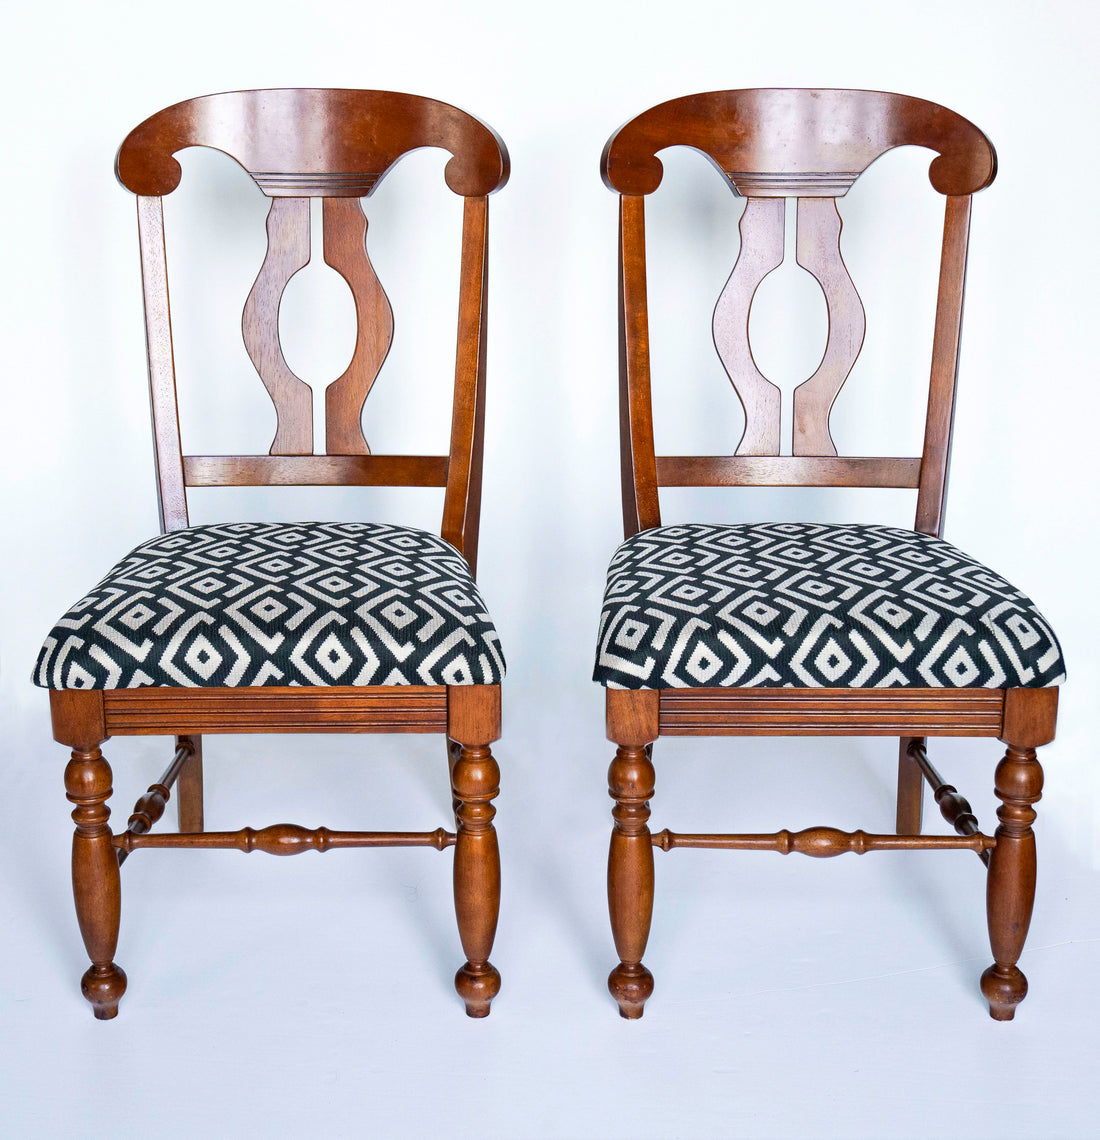 Two Traditional Side Chairs with Black and Beige Woven Fabric